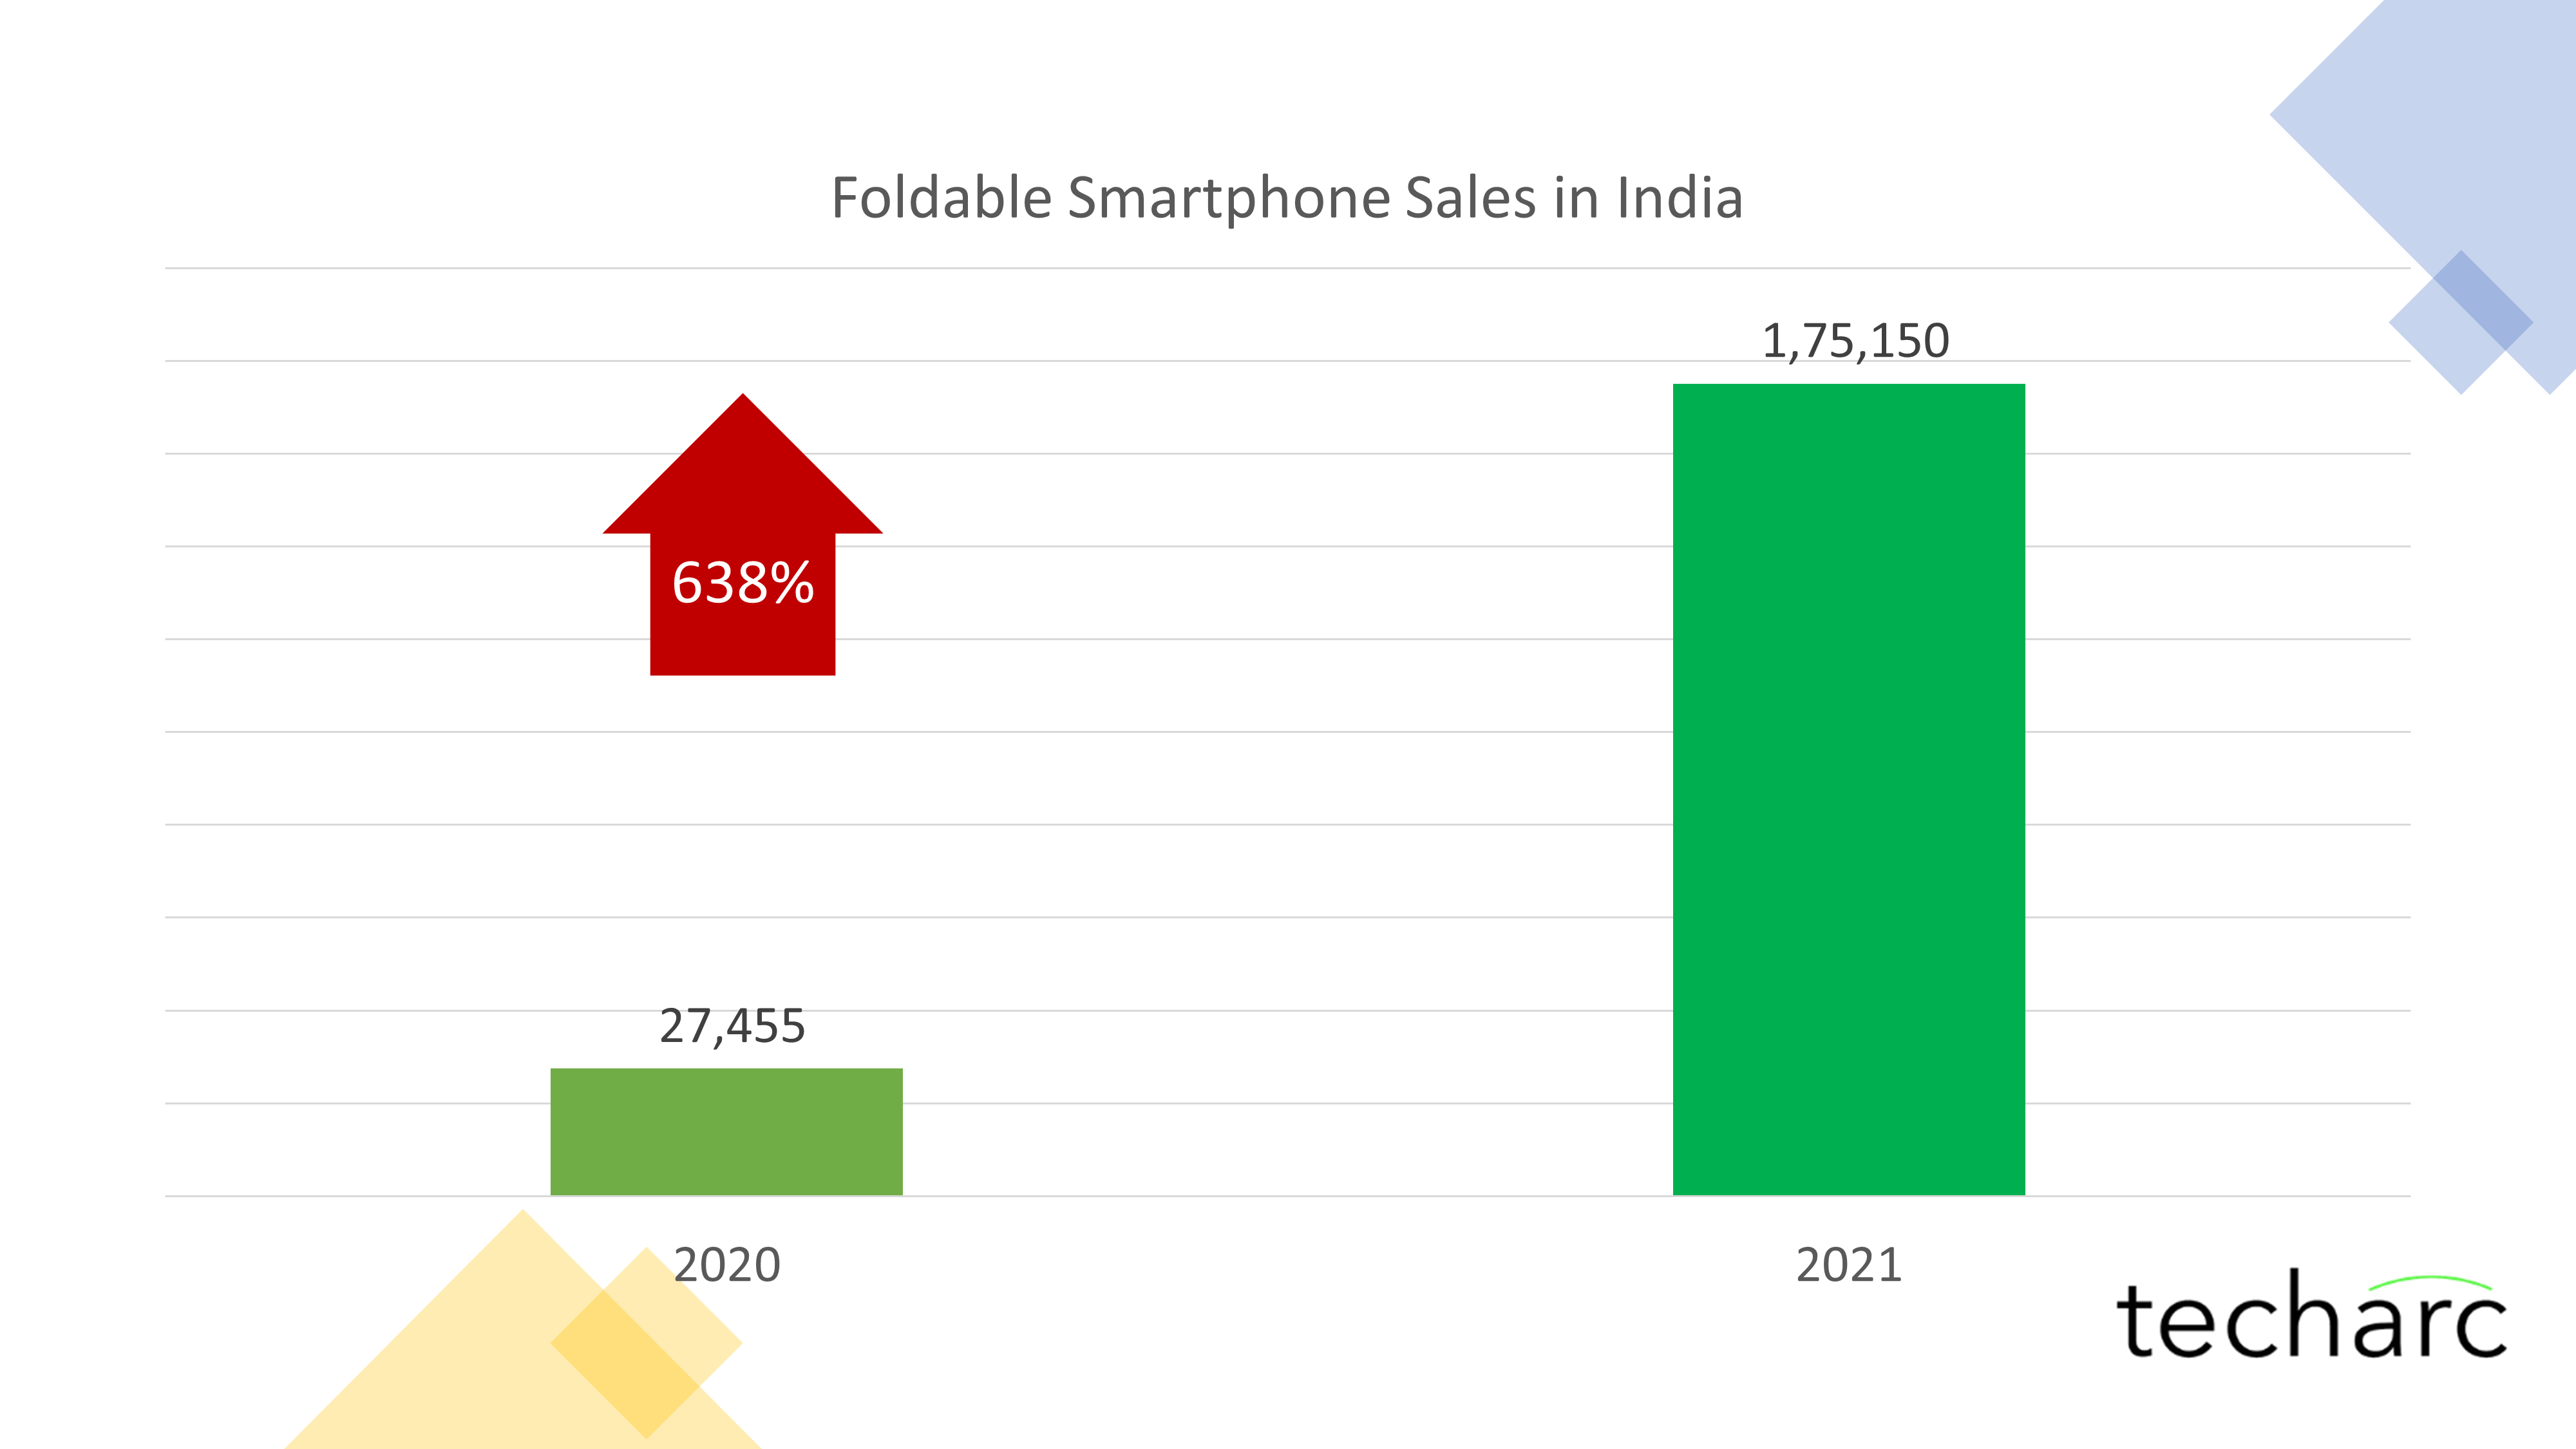 Foldable Smartphones to witness 638% jump in sales in CY 2021, expected to touch 300,000 units sales in 2022.